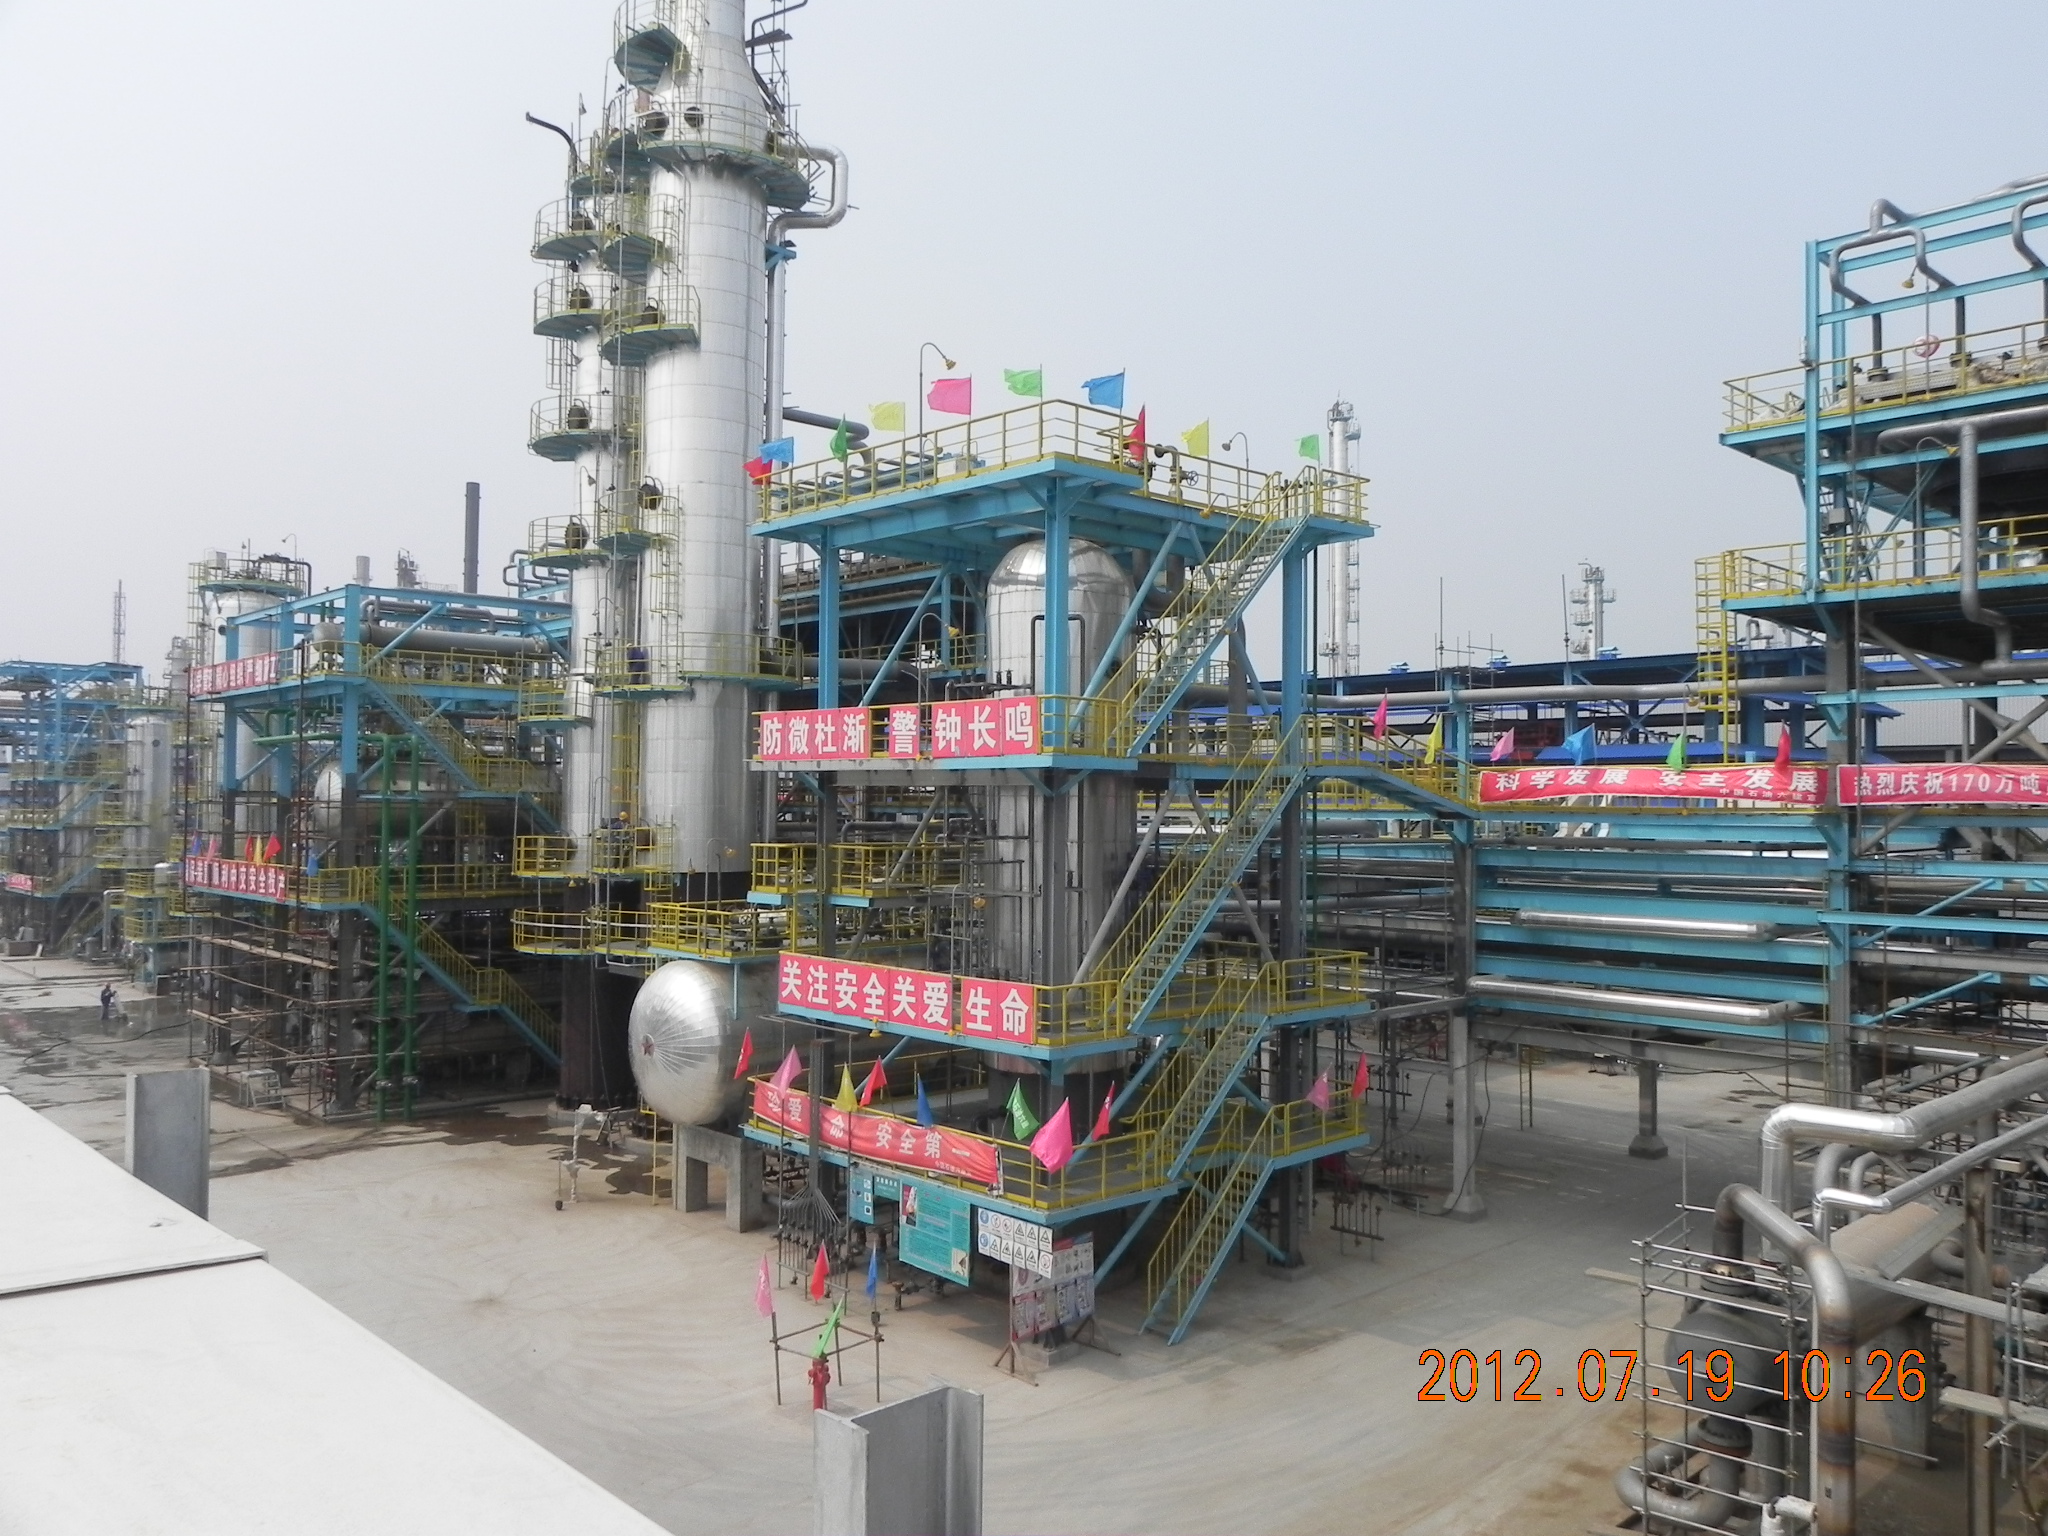 Huhehot 5M t/a Refinery Revamping Project